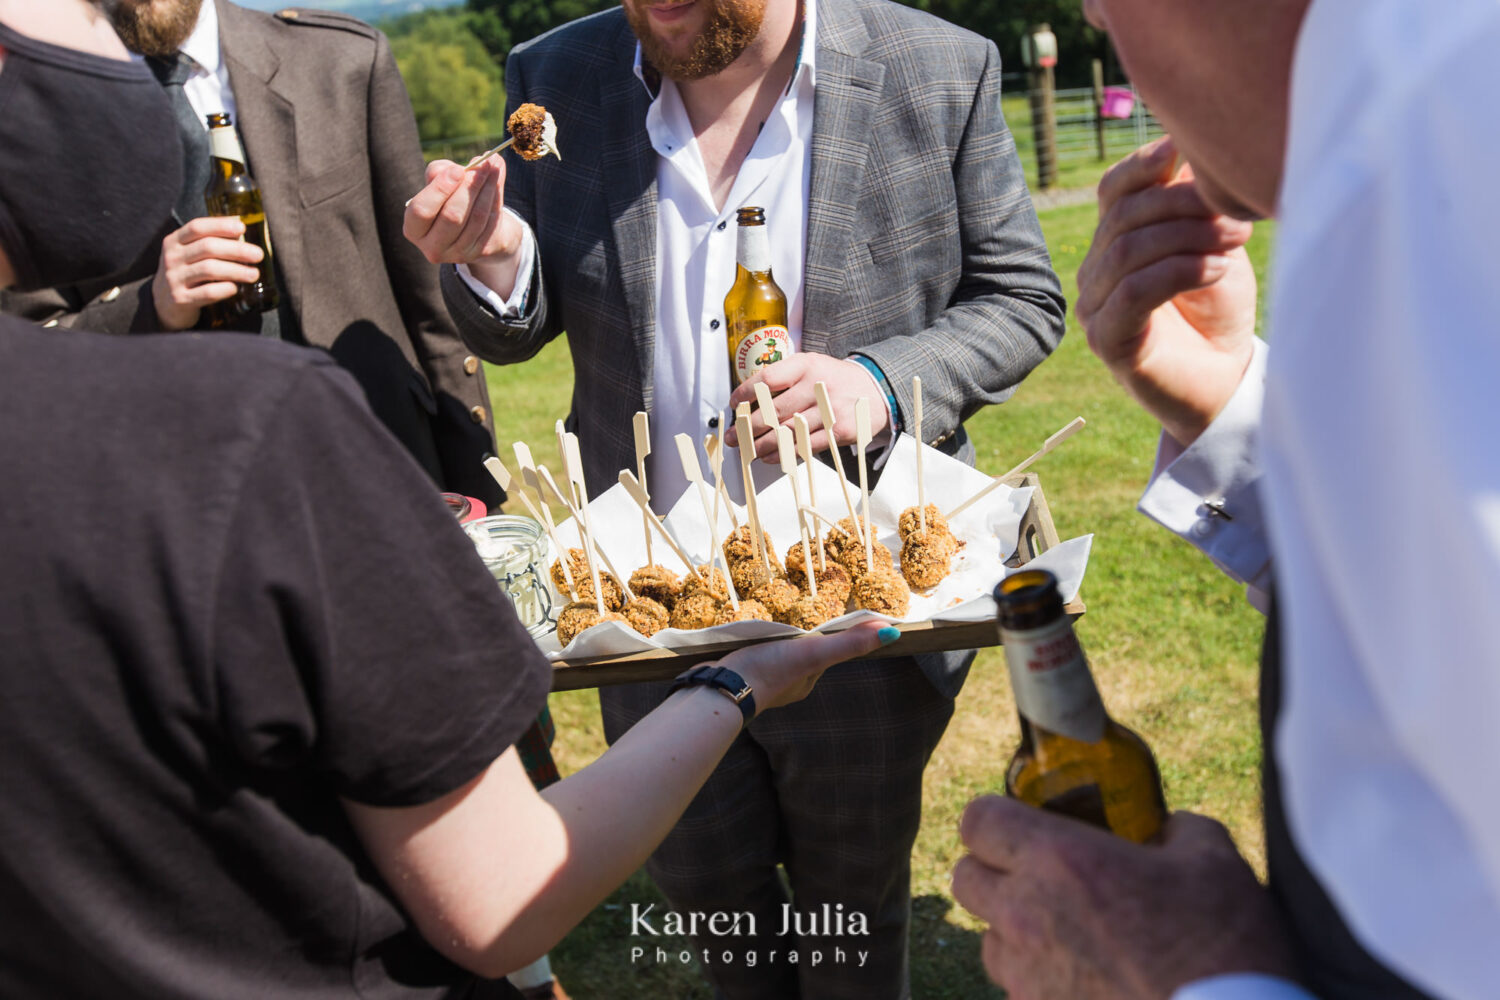 staff bring canapes for guests to ejoy during the dinks reception